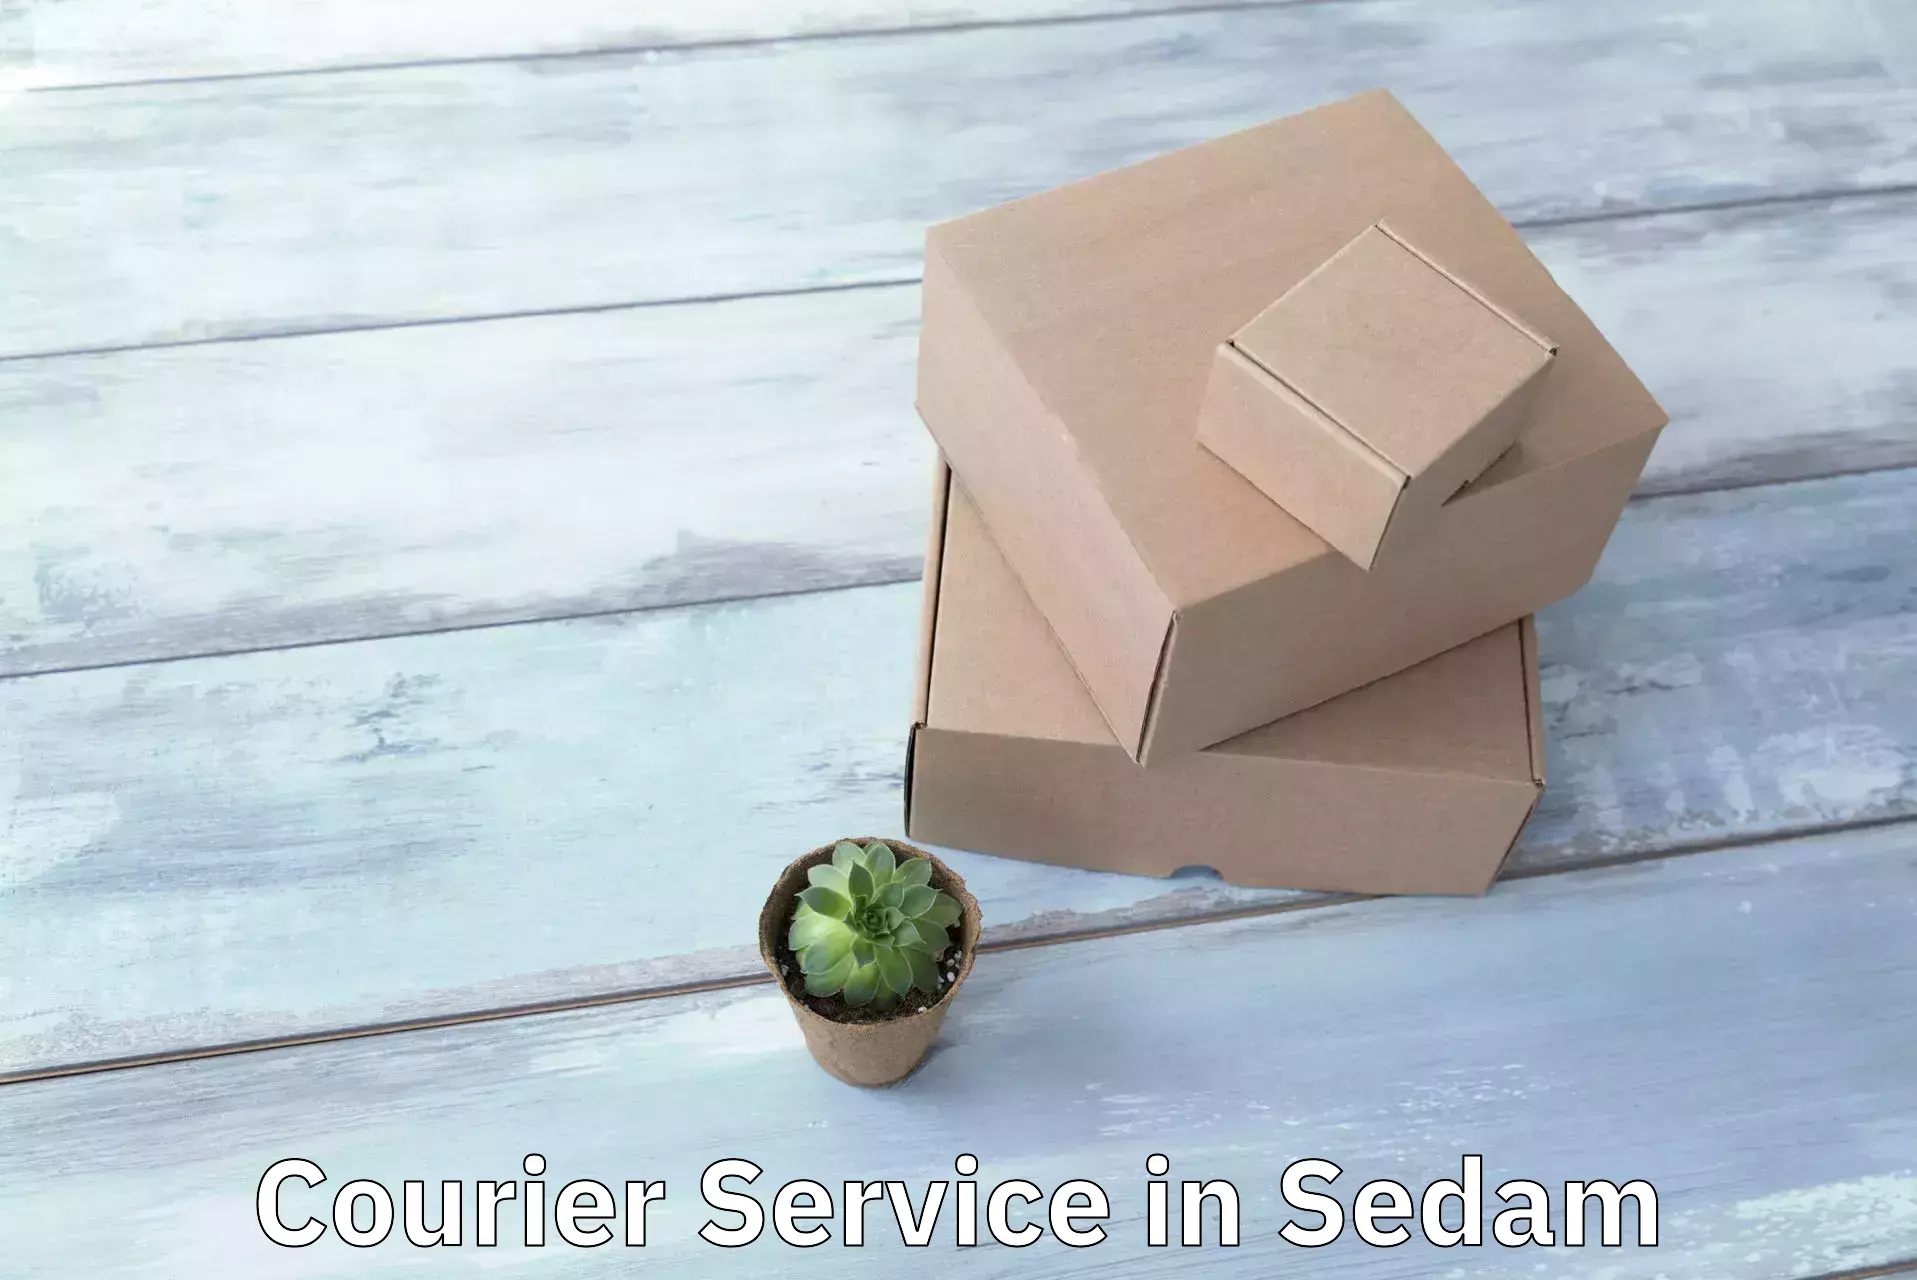 Supply chain delivery in Sedam